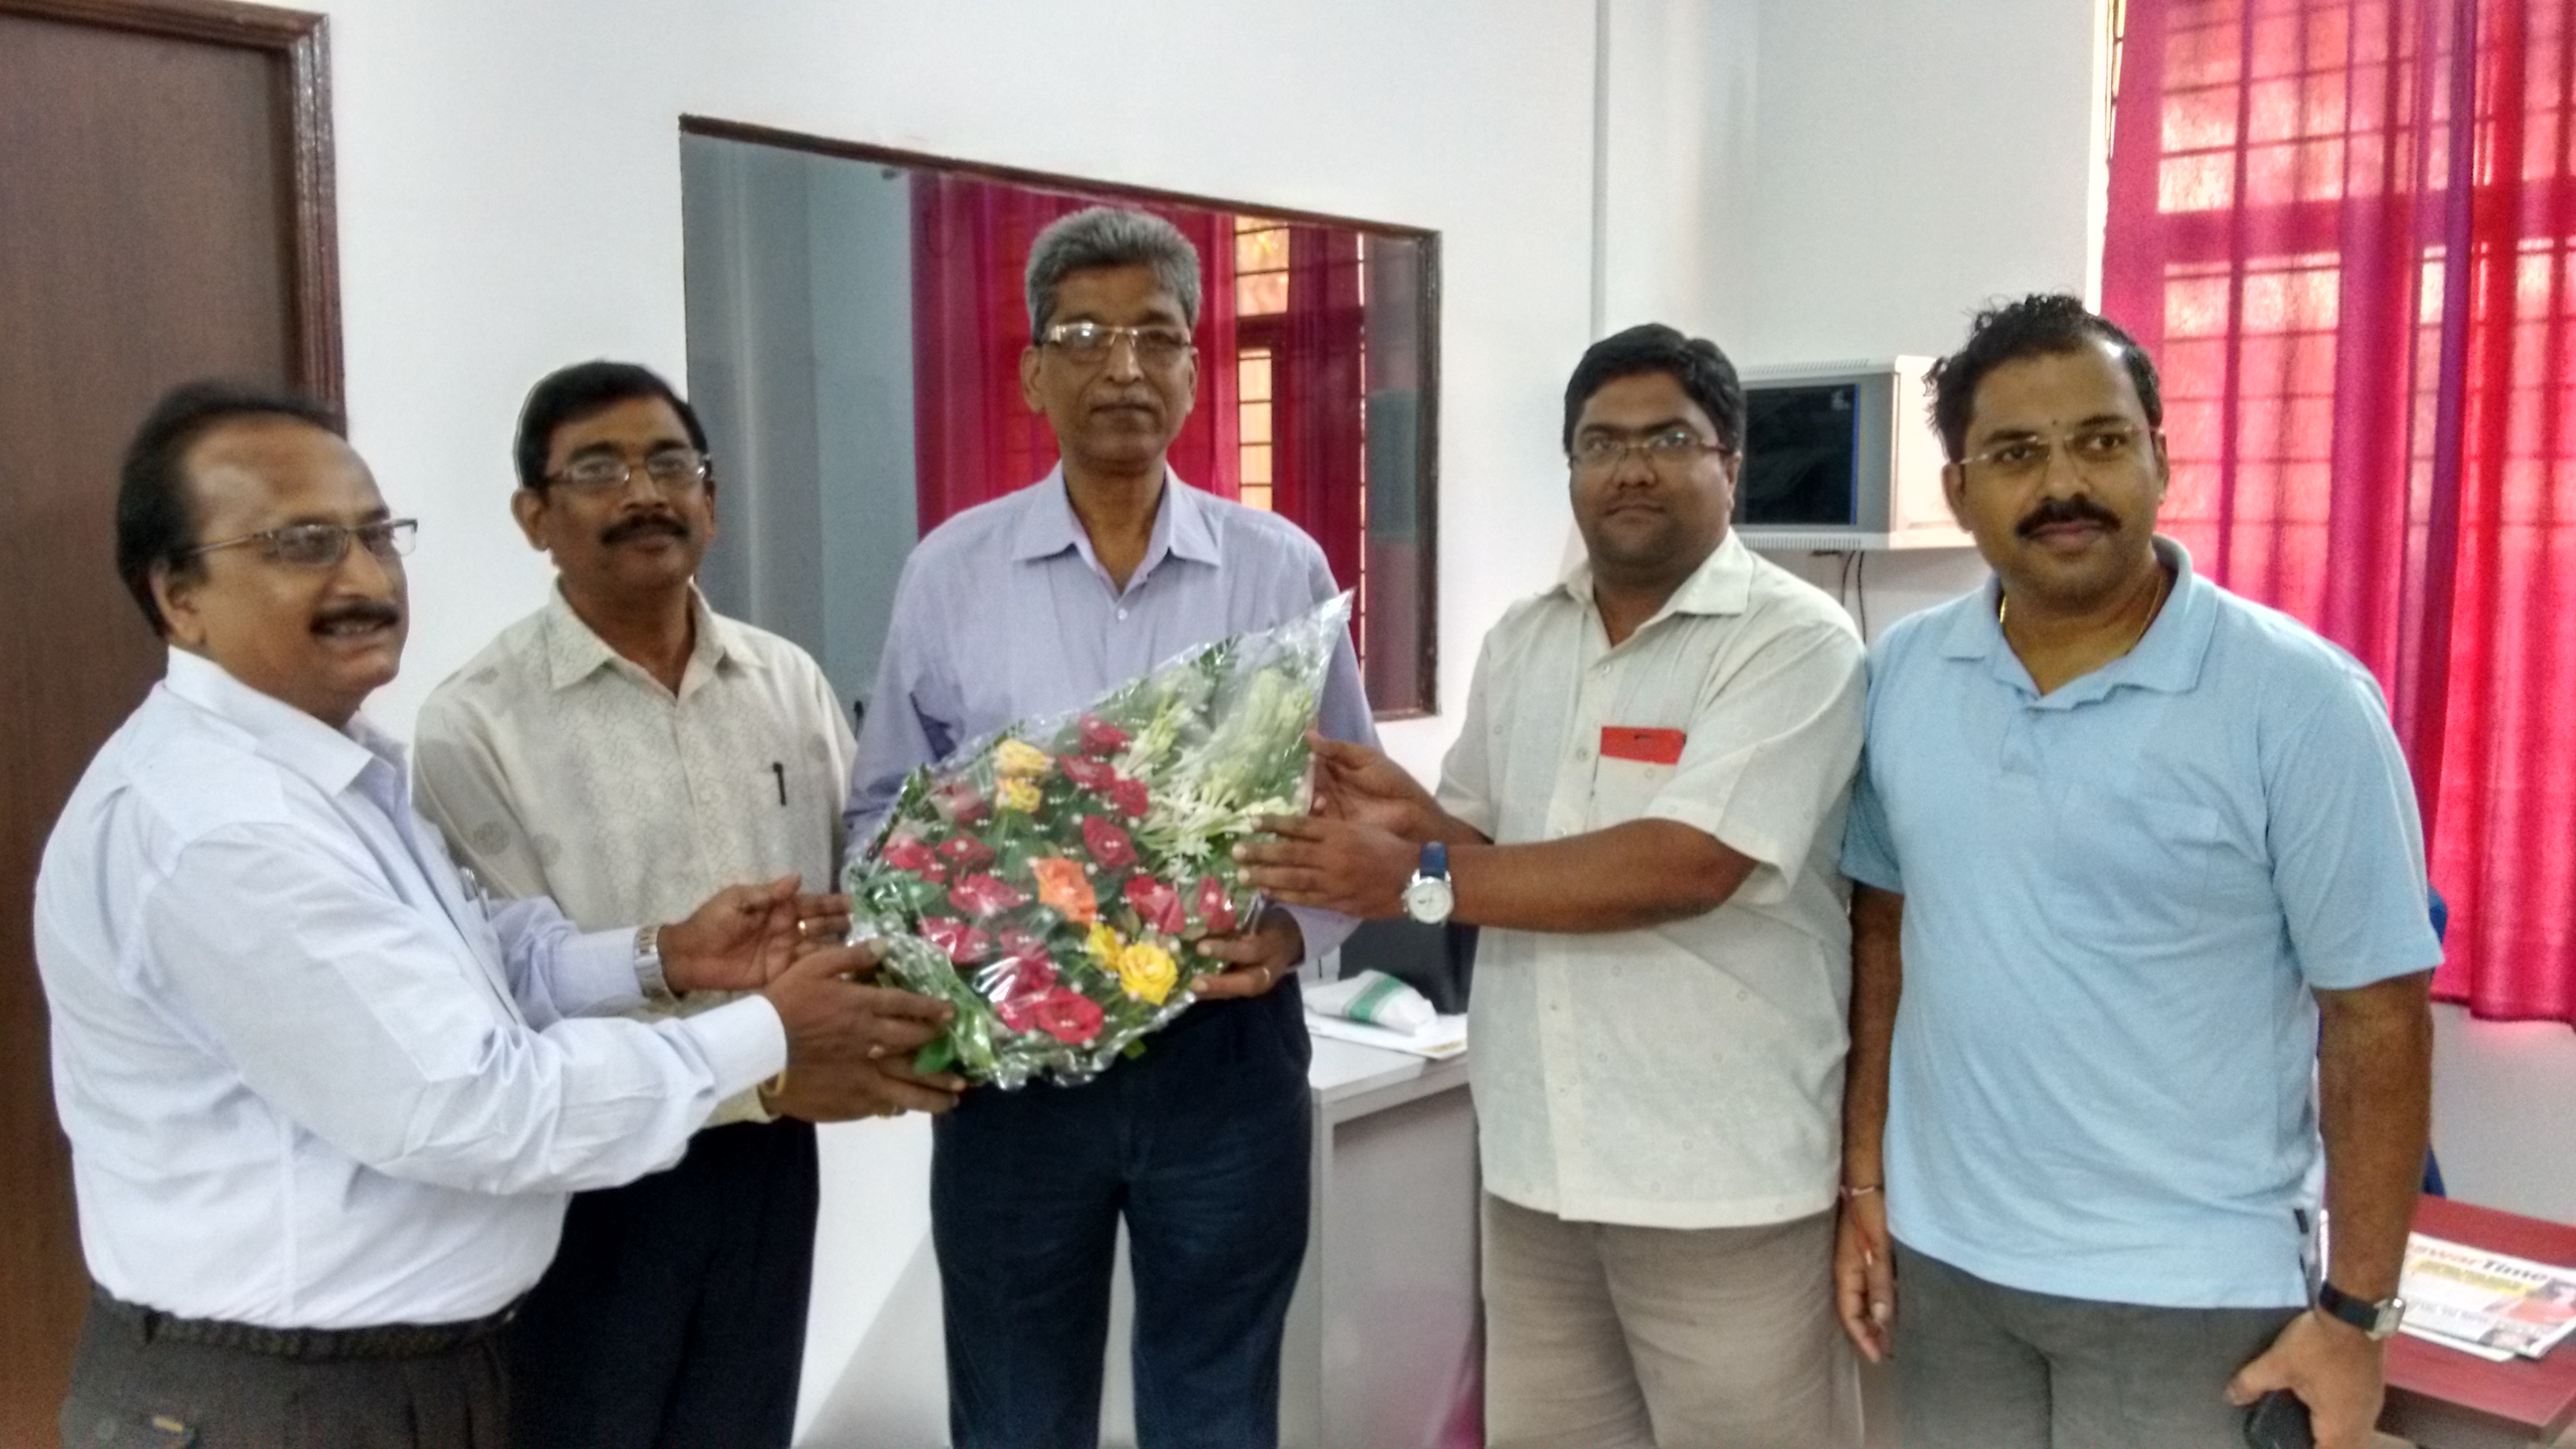 OSOU Bhubaneswar Camp Office Staff Greets the First VC, Dr. Srikant Mohapatra 